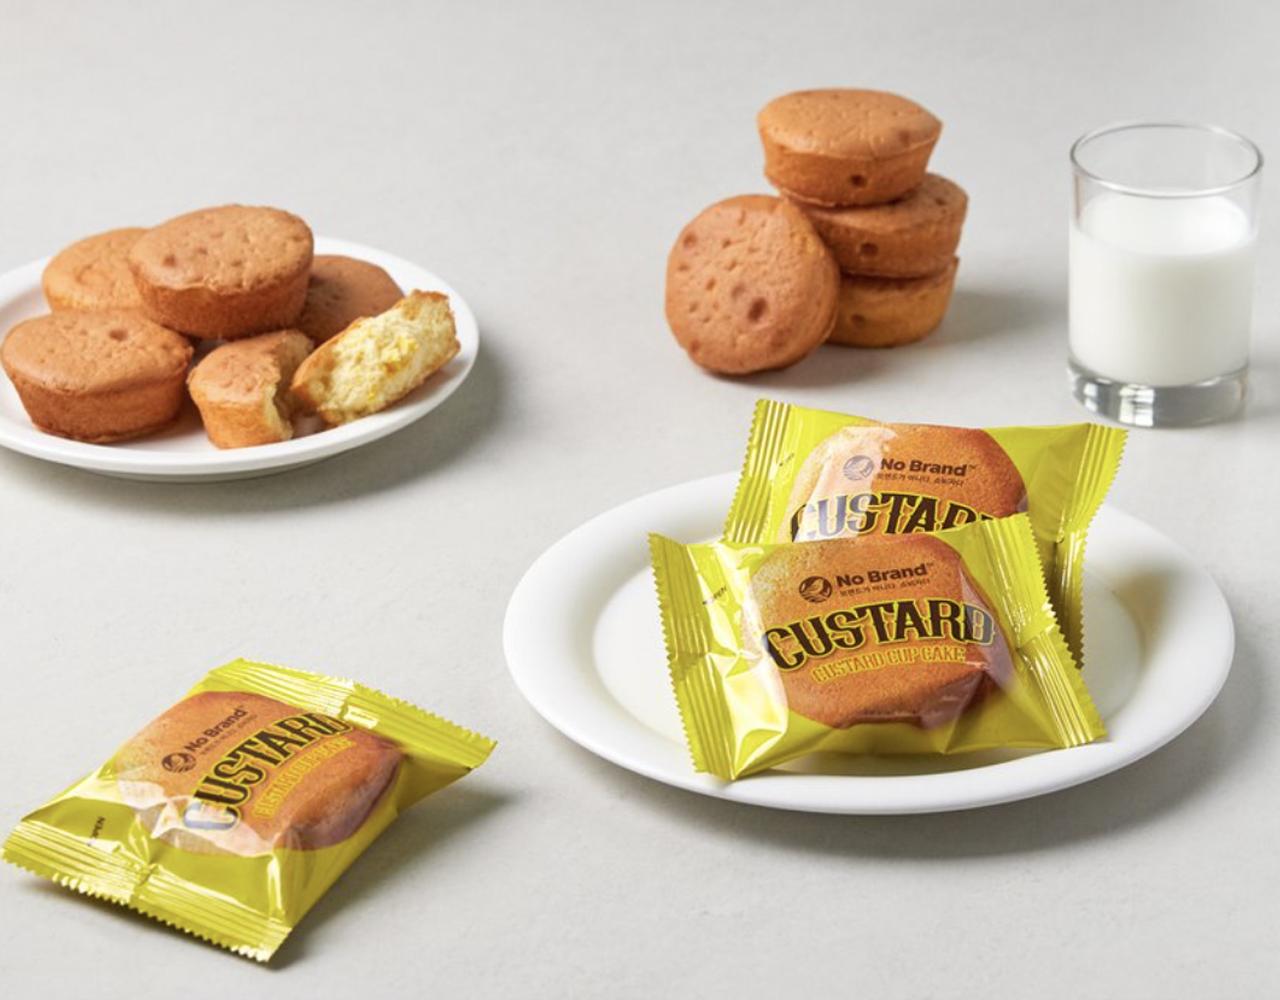 korean brand no brand's custard cup cakes packs and cakes on plates, with a glass of milk